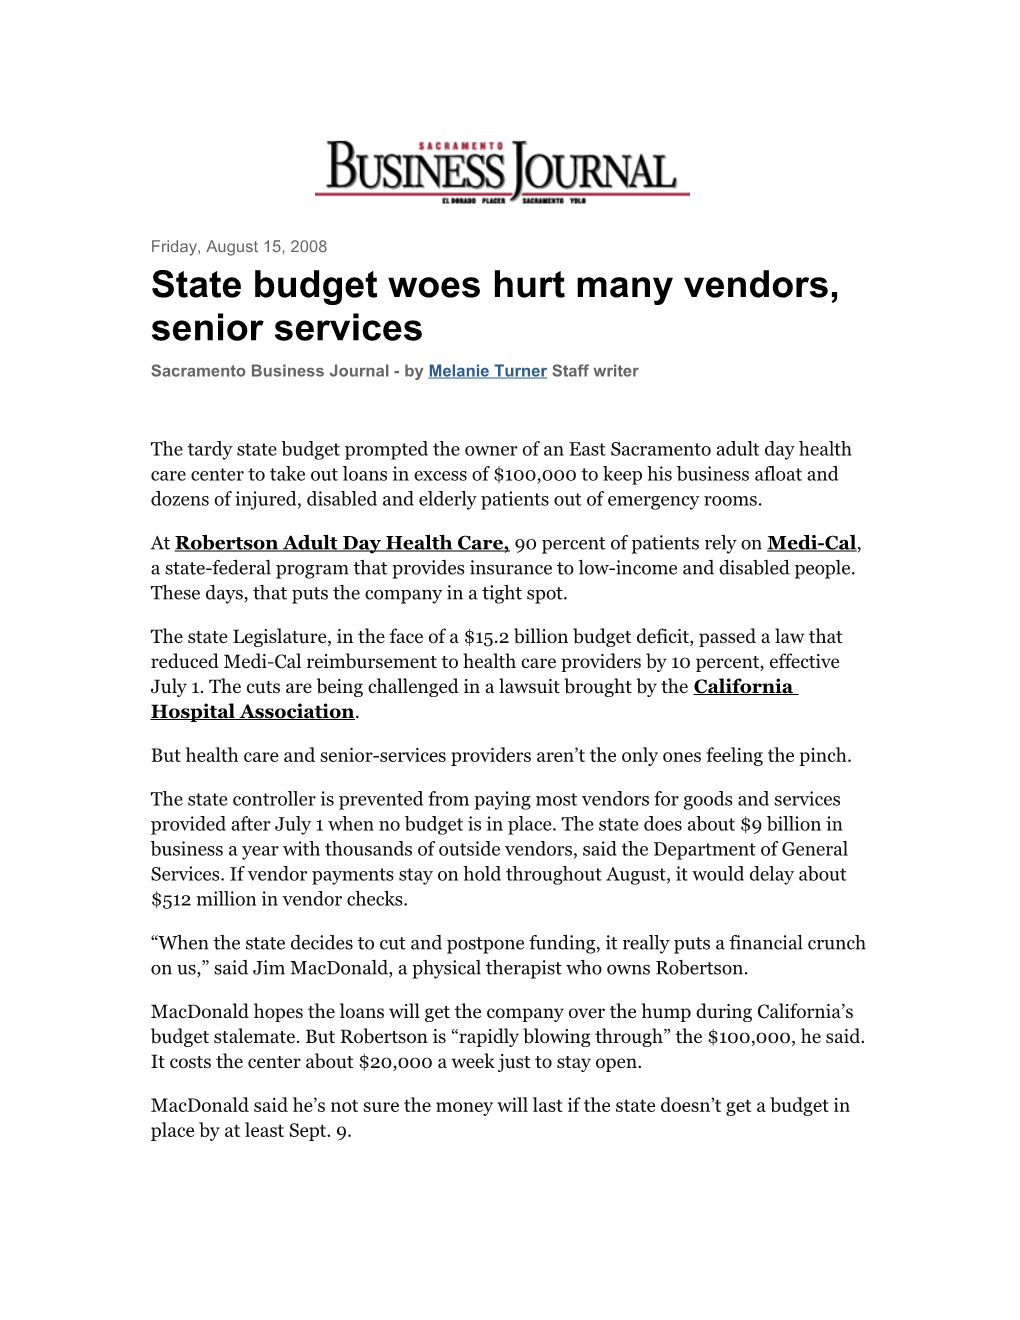 State Budget Woes Hurt Many Vendors, Senior Services